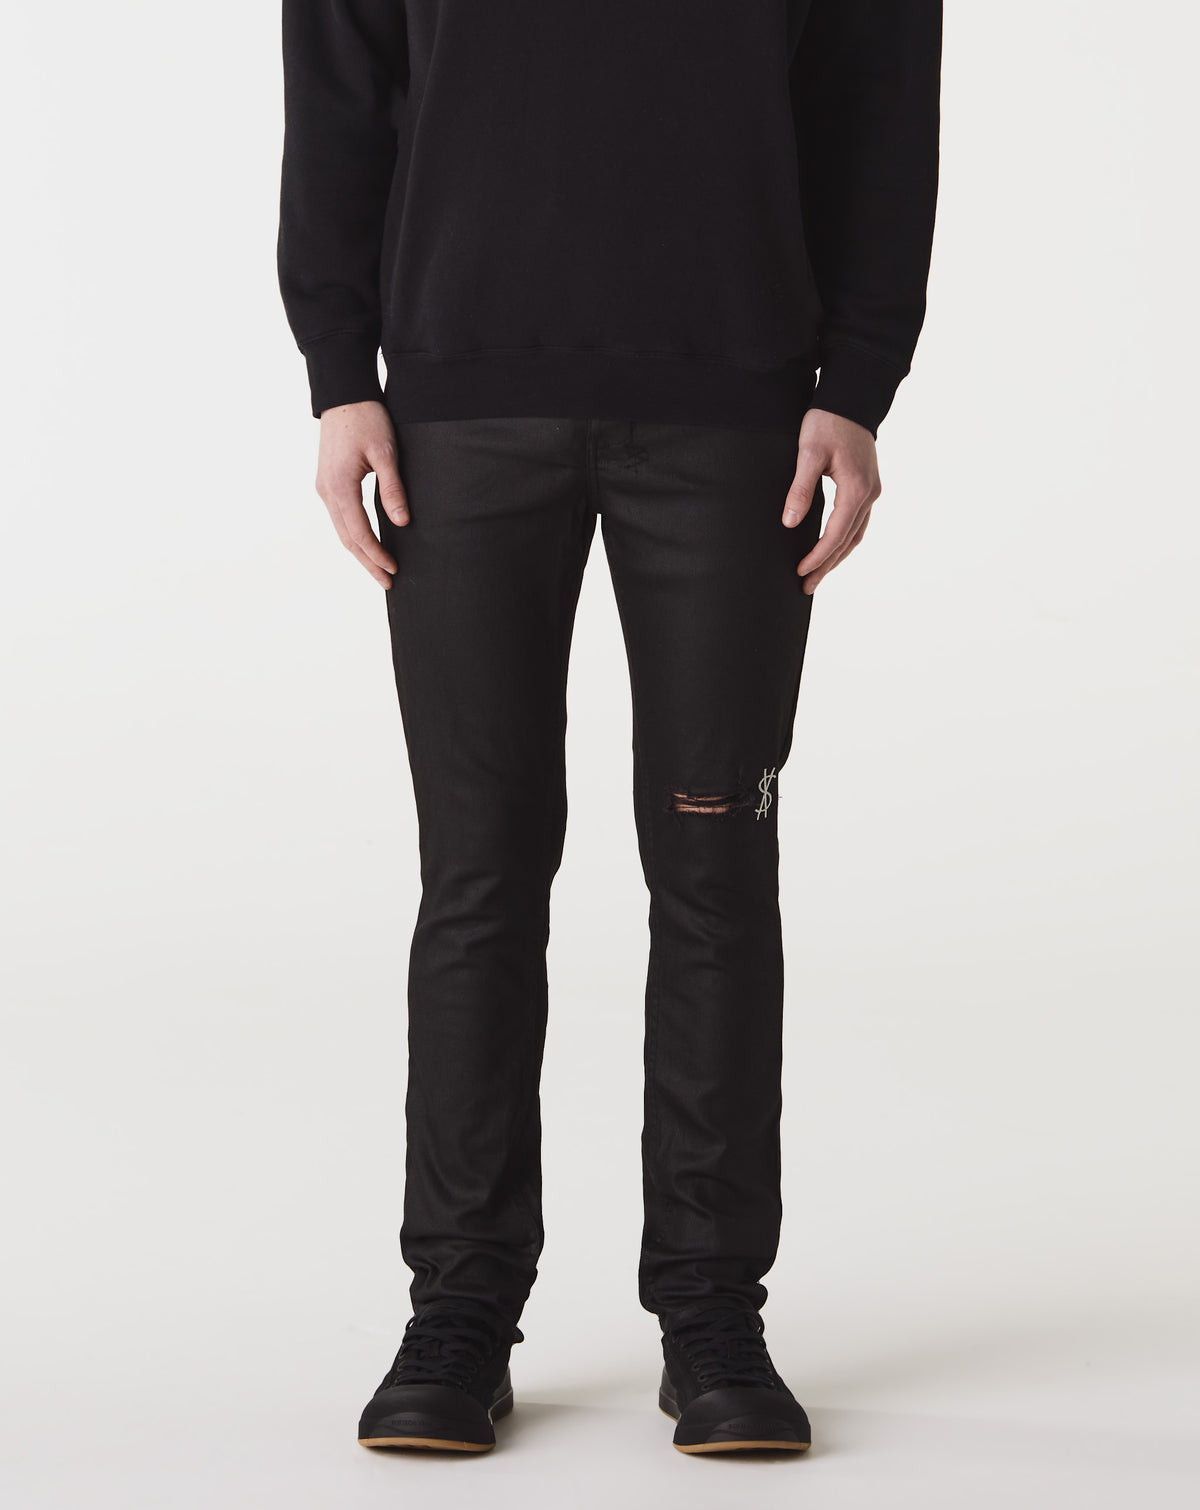 Ksubi Chitch Waxed Silver - Rule of Next Apparel